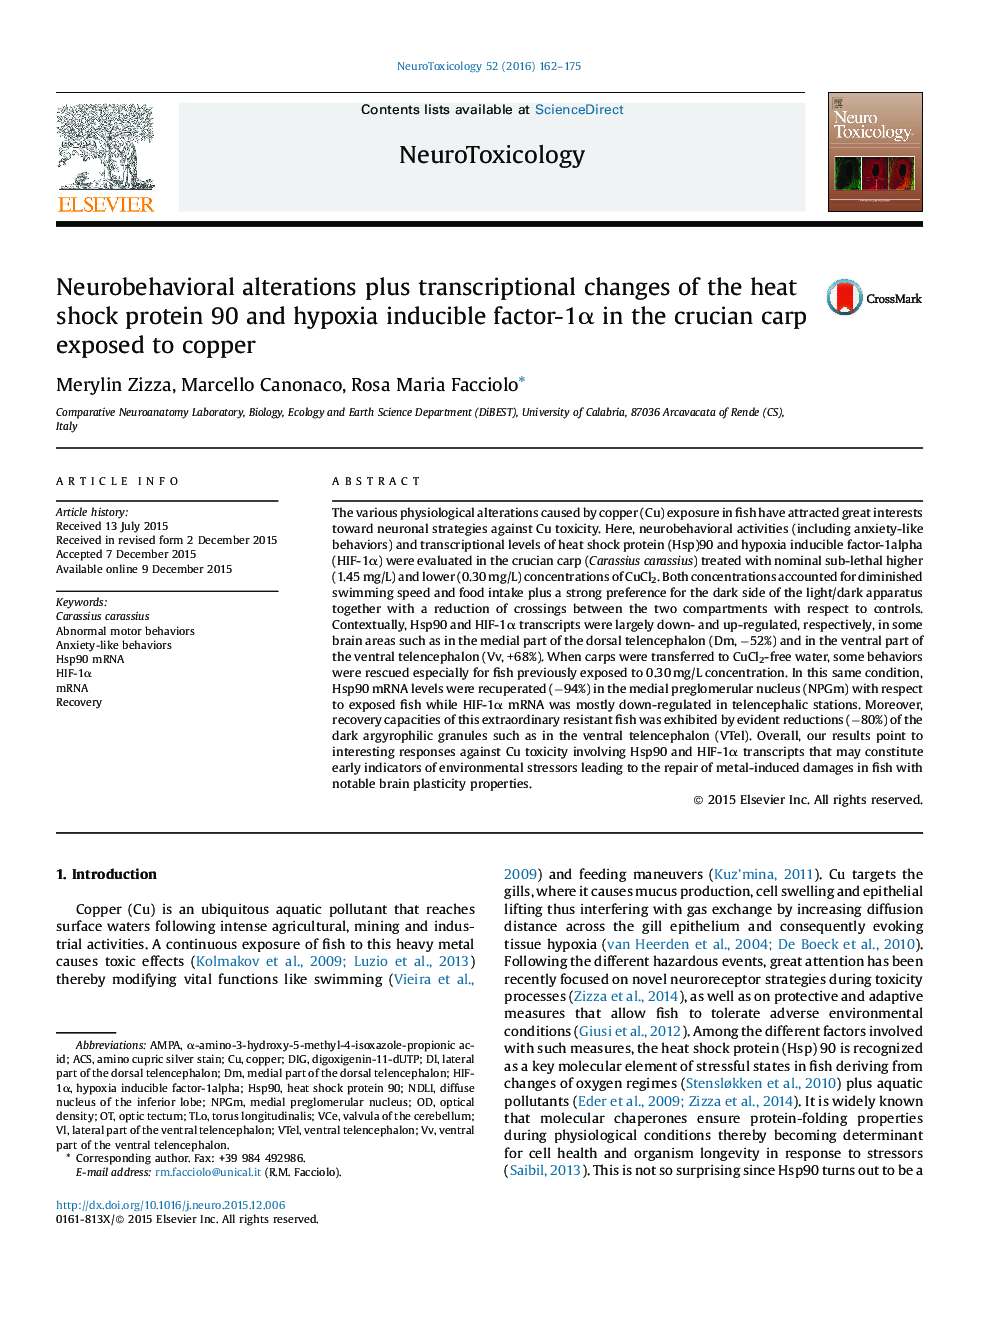 Neurobehavioral alterations plus transcriptional changes of the heat shock protein 90 and hypoxia inducible factor-1Î± in the crucian carp exposed to copper